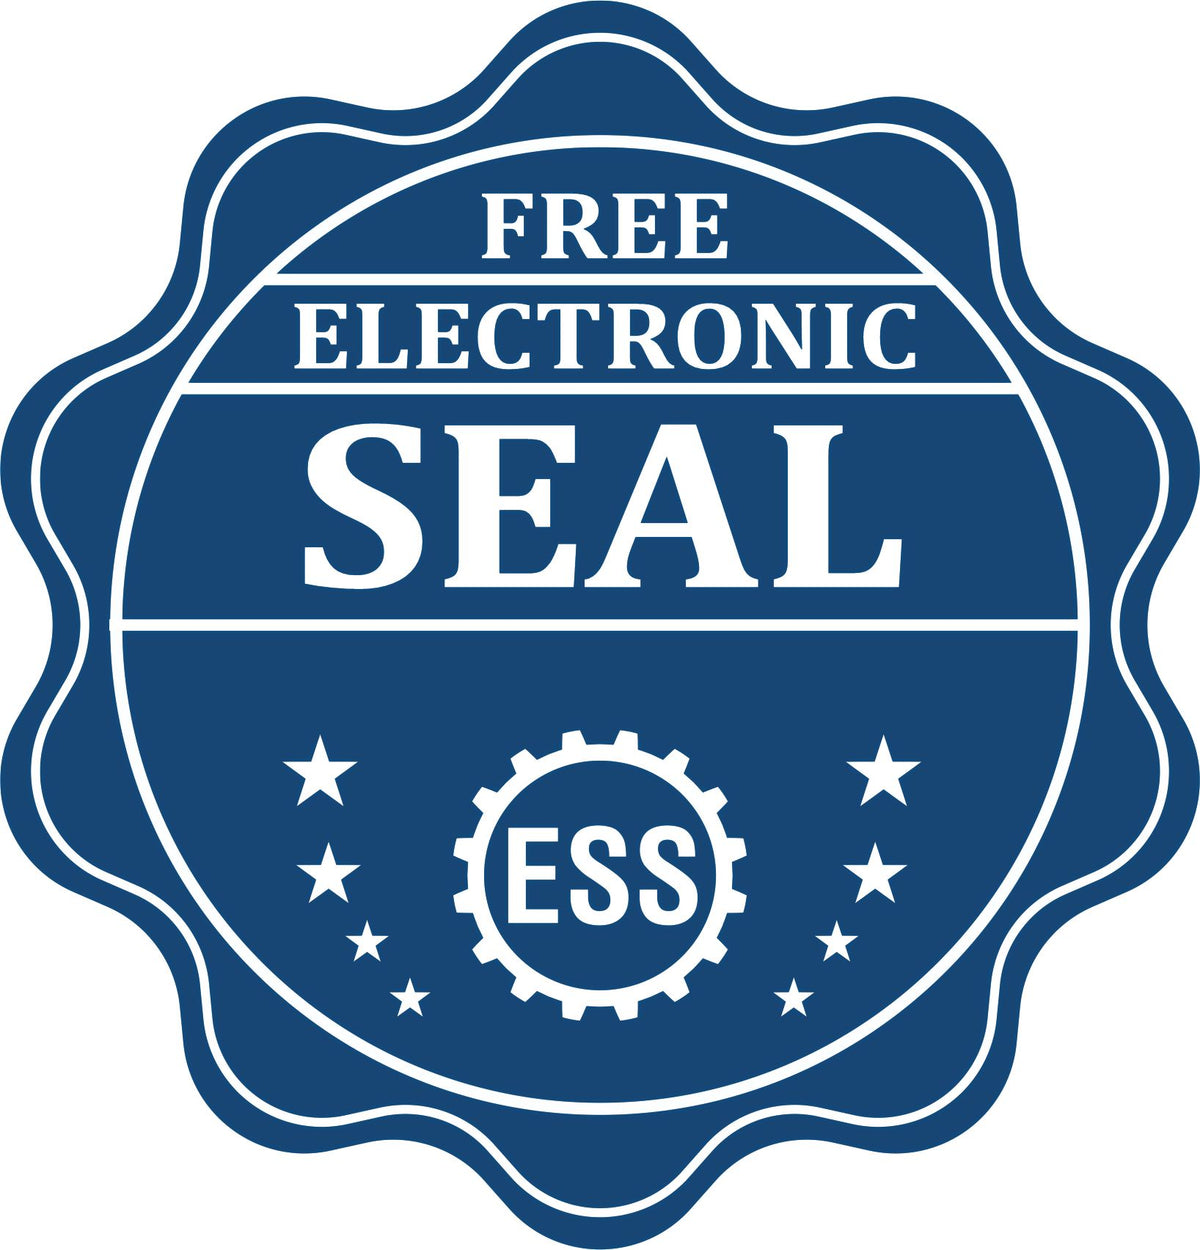 A badge showing a free electronic seal for the Wooden Handle Idaho Rectangular Notary Public Stamp with stars and the ESS gear on the emblem.